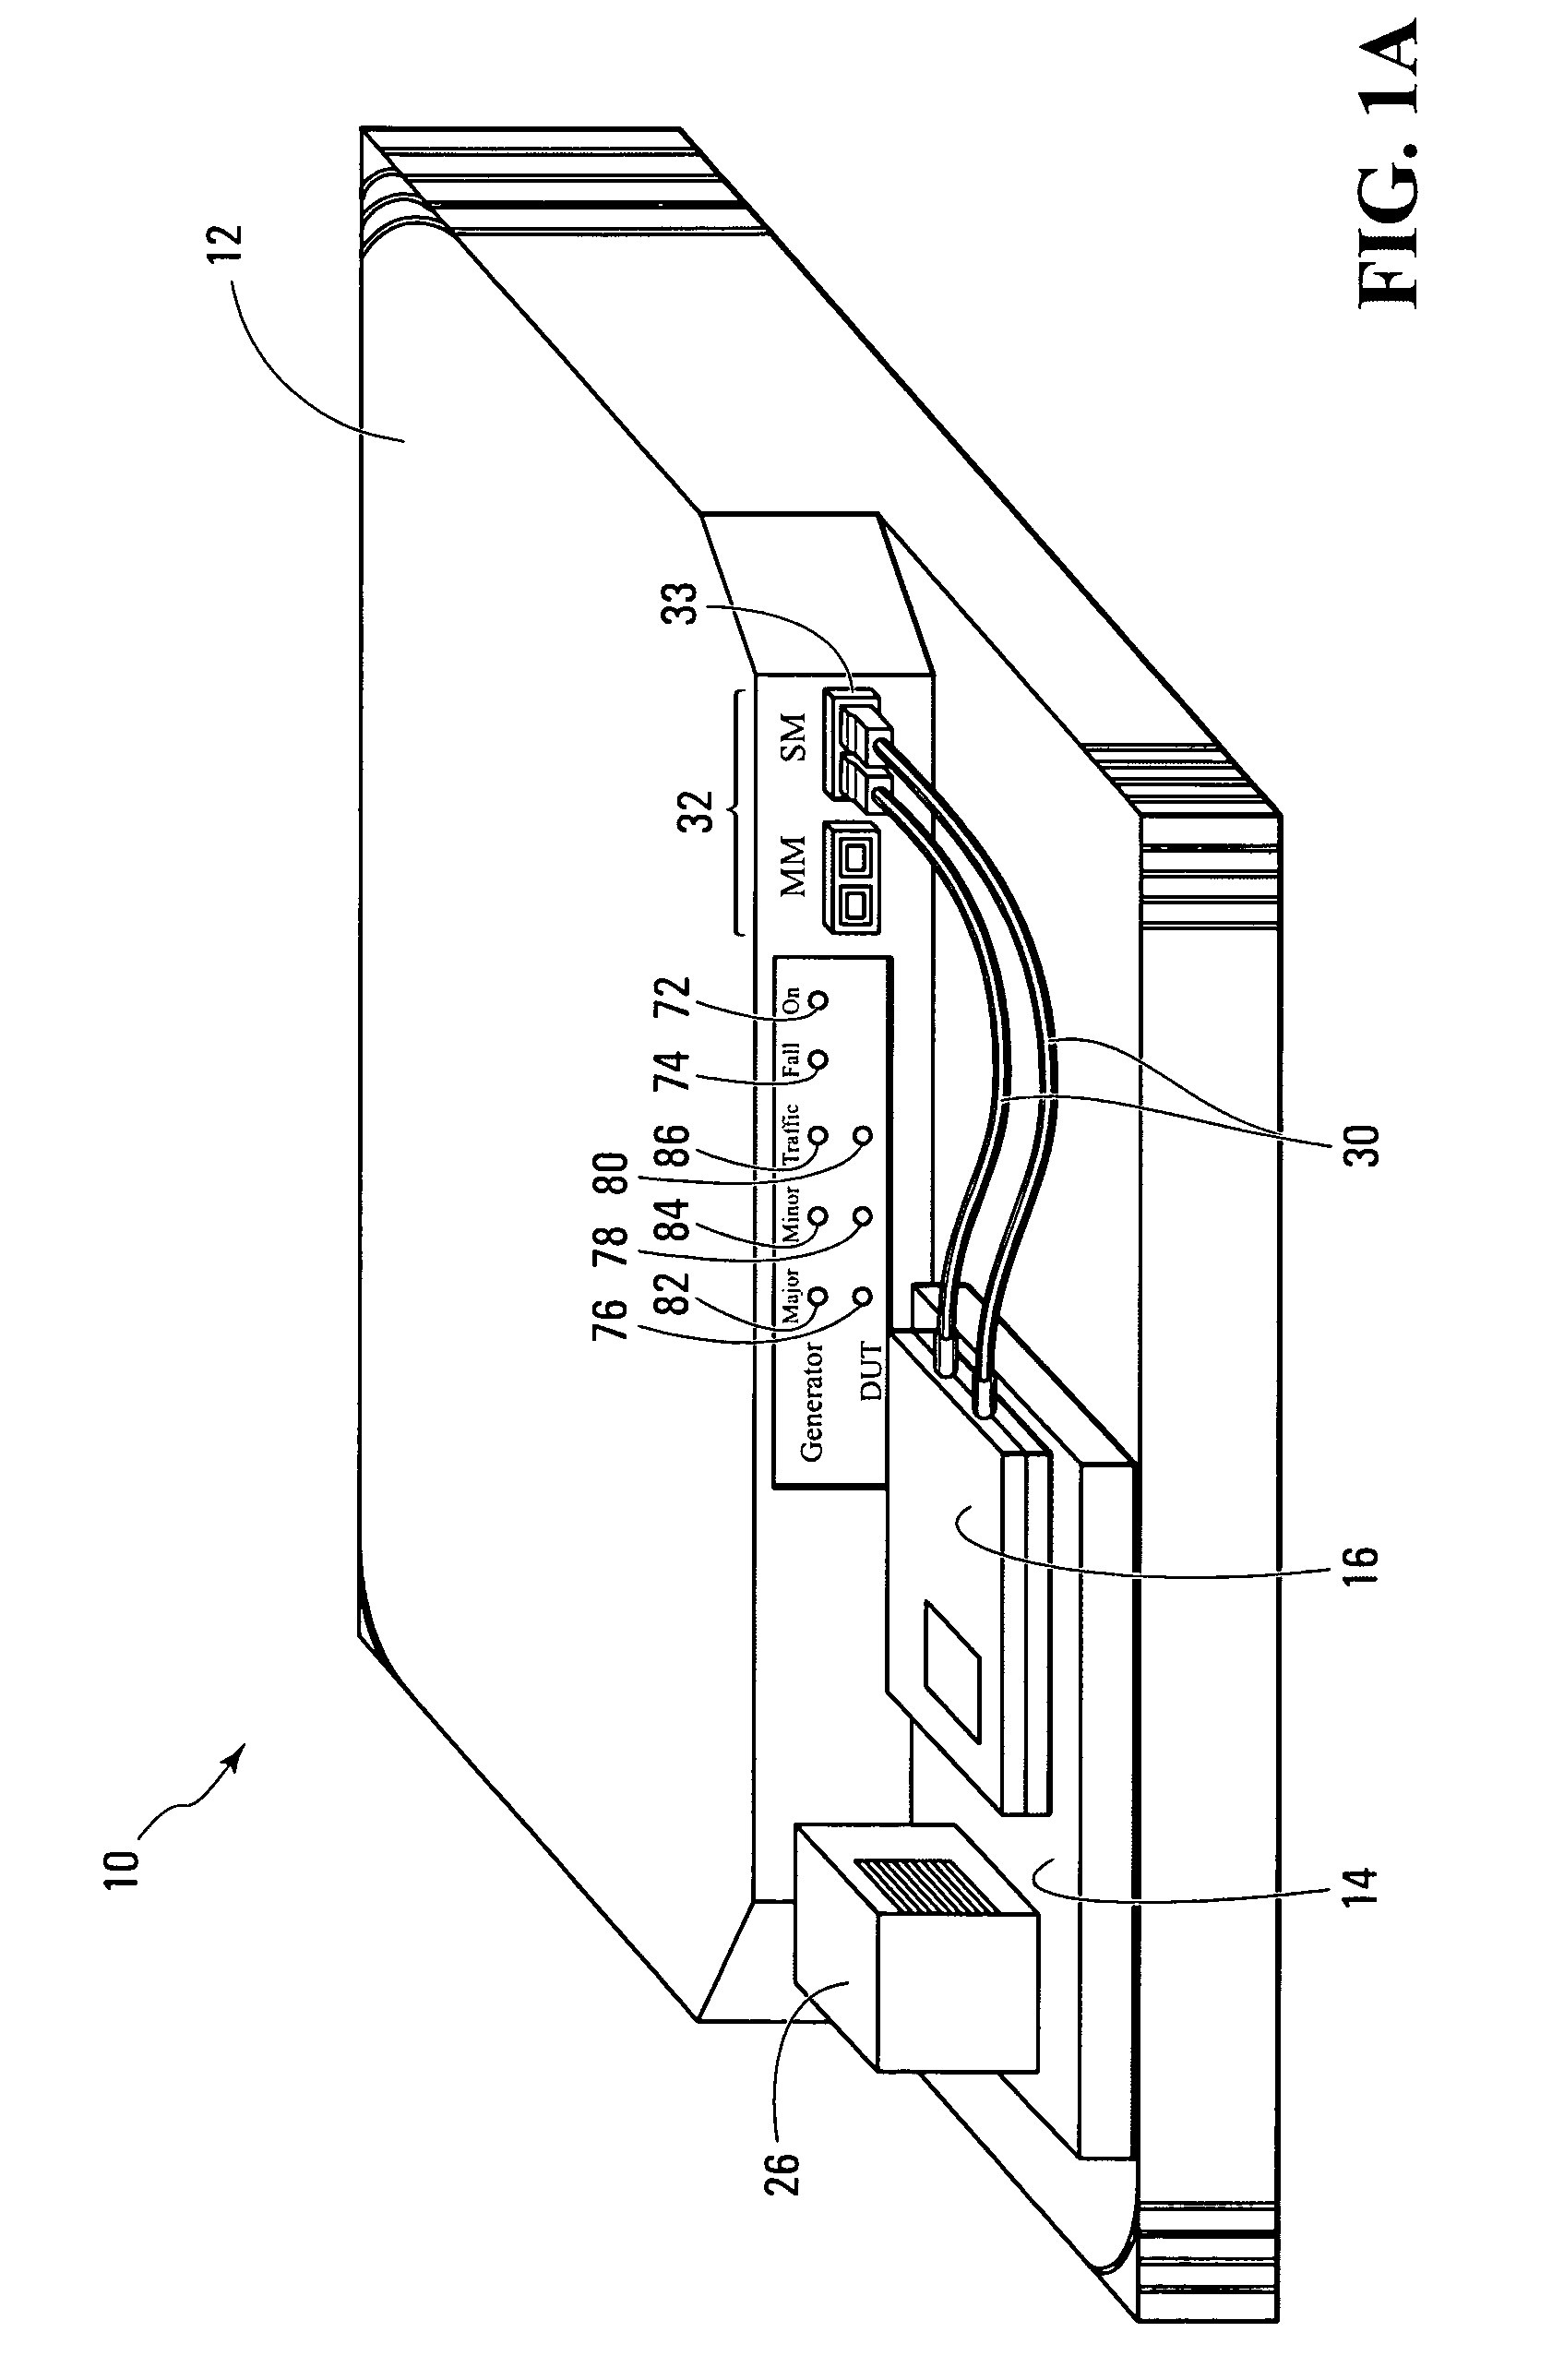 MSA transceiver testing device and interface for use therewith